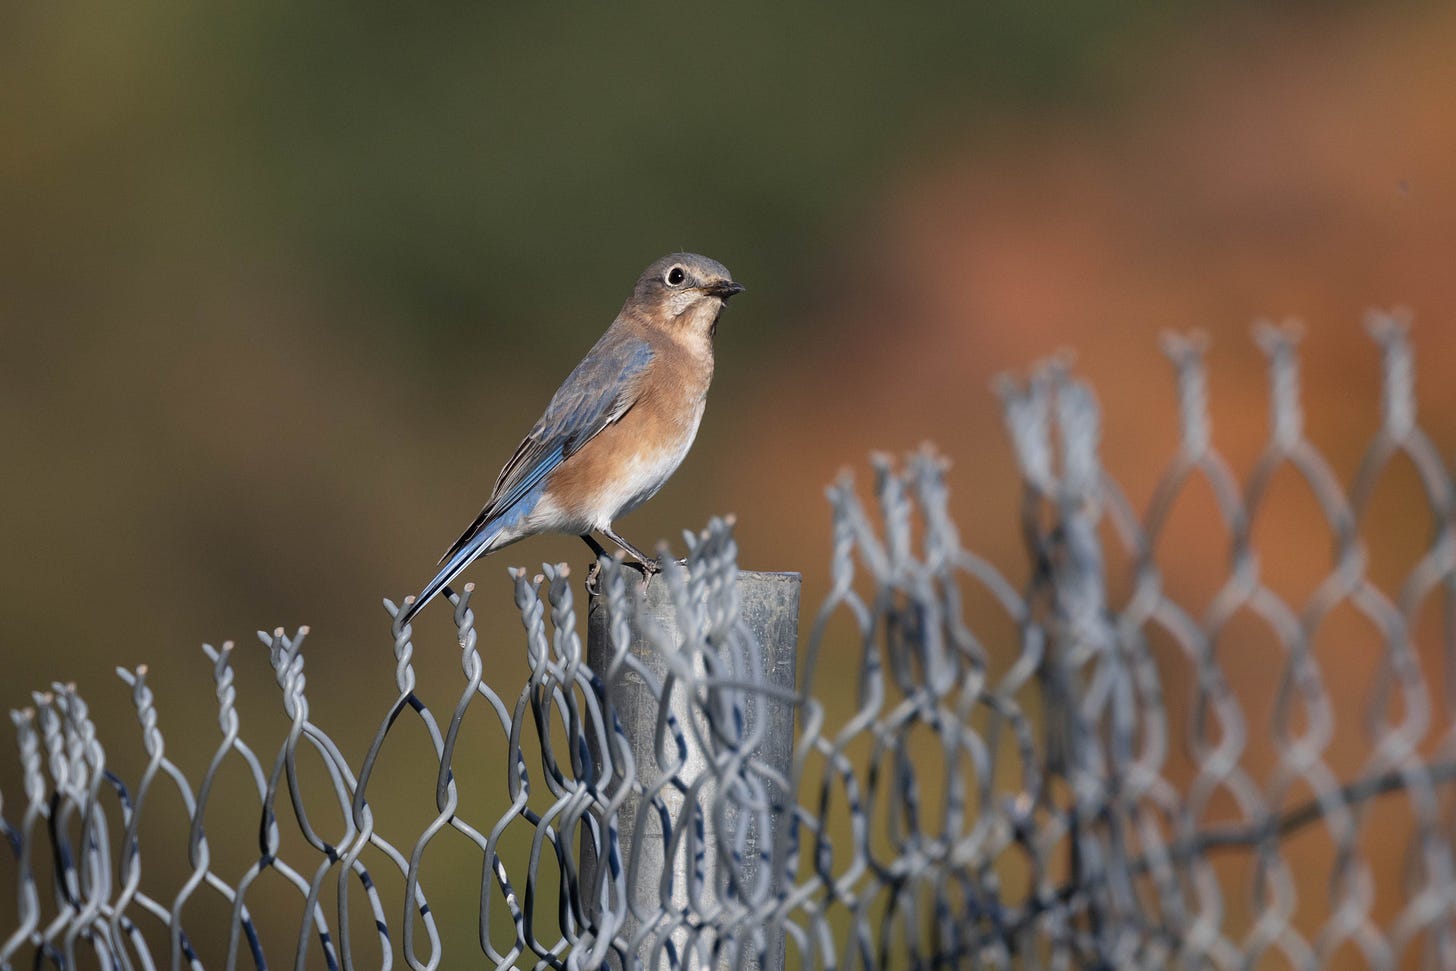 a blue-gray bird with a blue tail, rust-colored belly, white eye ring and black beak standing atop the post of a chain-link fest, facing right and looking at the viewer. there are blurred fall colors in the background.